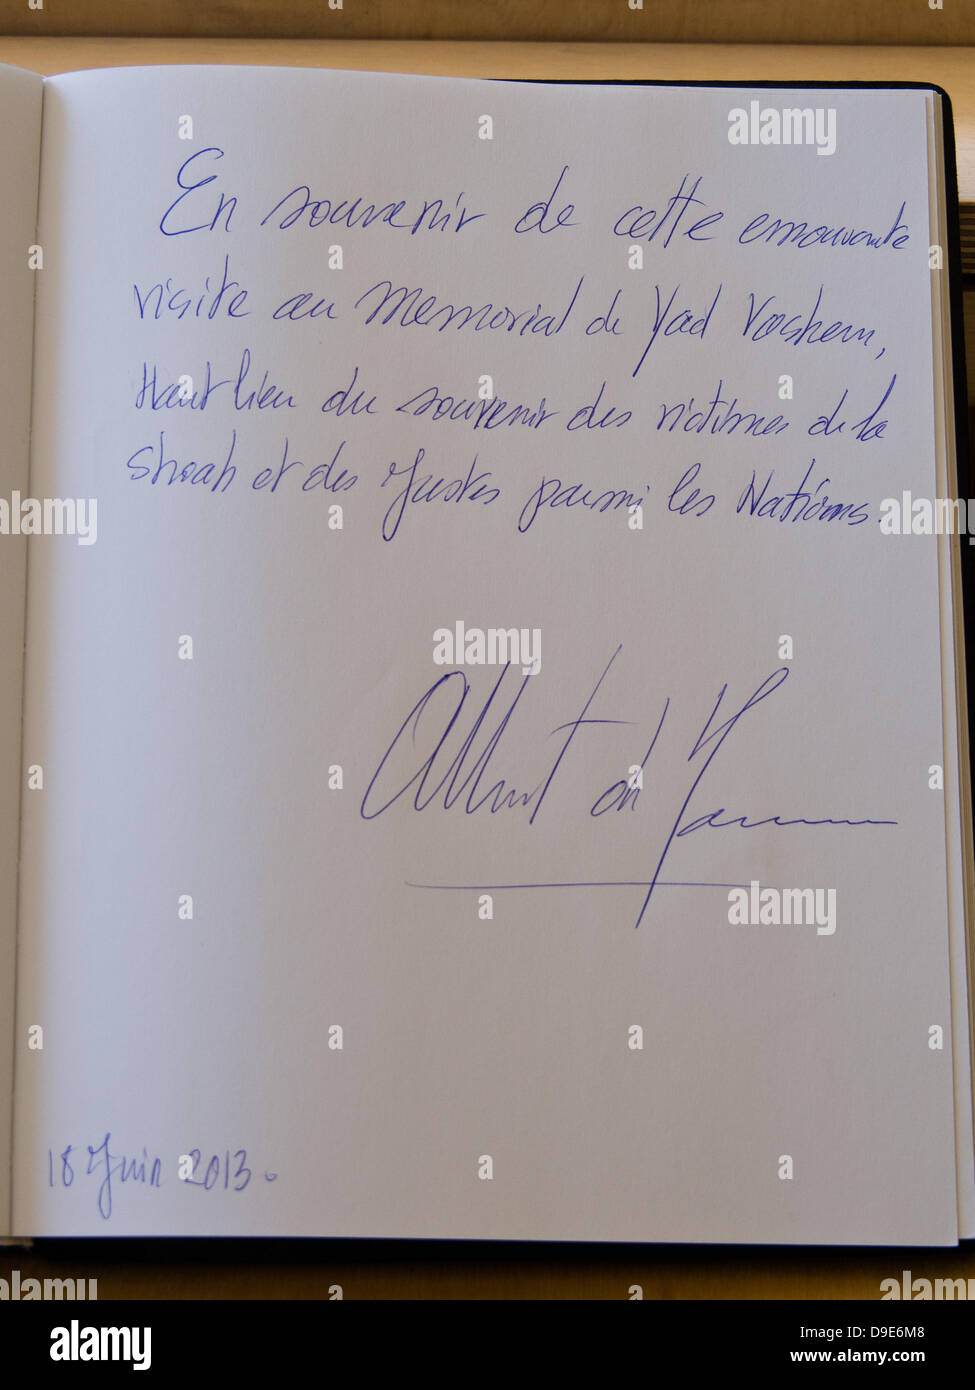 erusalem, Israel. 18-June-2013. Yad Vashem Holocaust Museum guestbook entry made by Monaco's reigning monarch, Prince Albert II, concluding his visit to Yad Vashem. Jerusalem, Israel. 18-June-2013.  Prince Albert II, reigning monarch of the Principality of Monaco, visits Yad Vashem Holocaust Museum. Prince Albert II will be taking part in the upcoming Facing Tomorrow - Israeli Presidential Conference. Credit:  Nir Alon/Alamy Live News Stock Photo